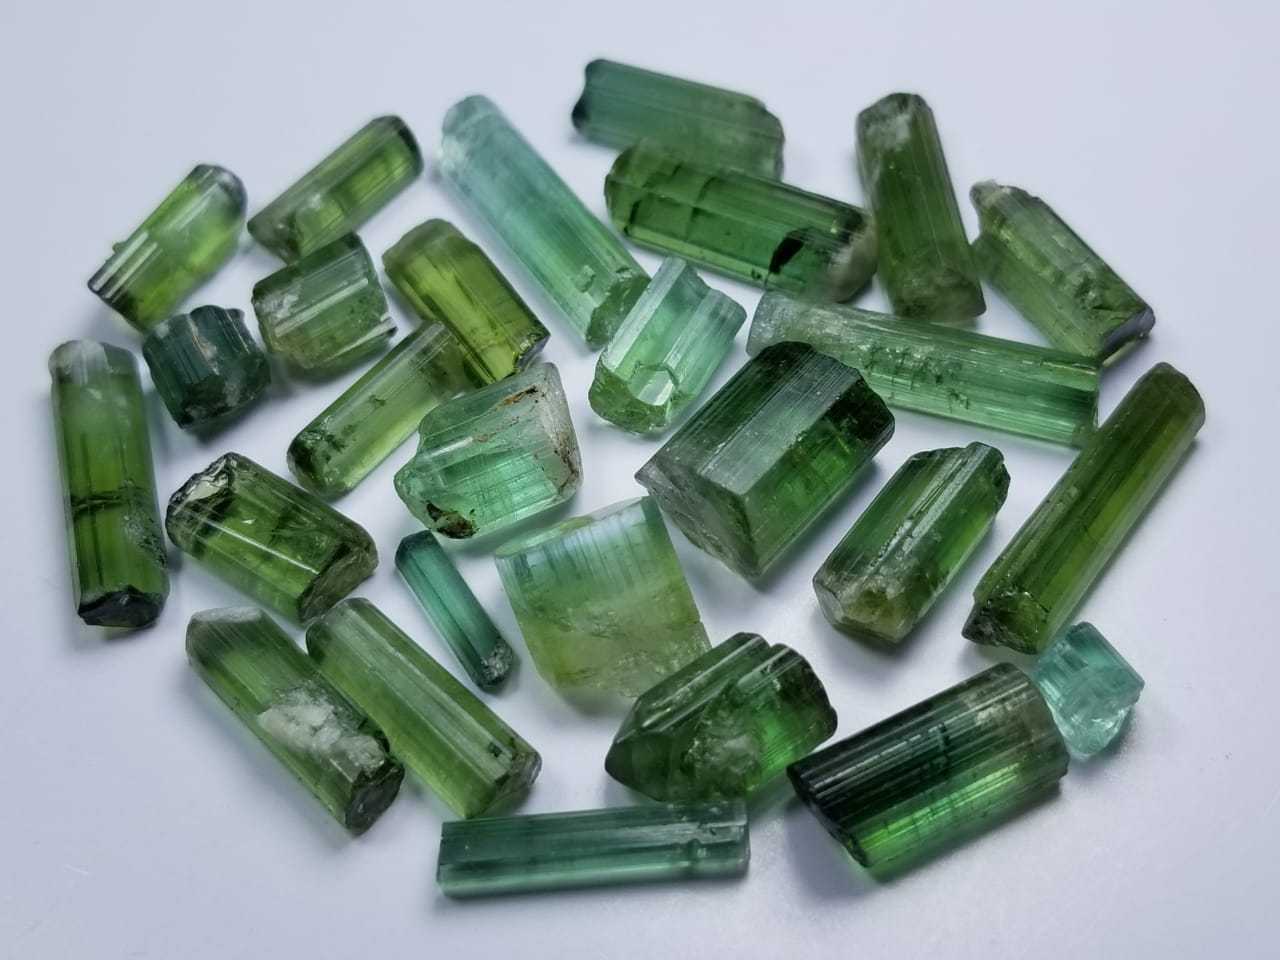 Green Tourmaline crystals lot Available Sourced from Afghanistan Mines